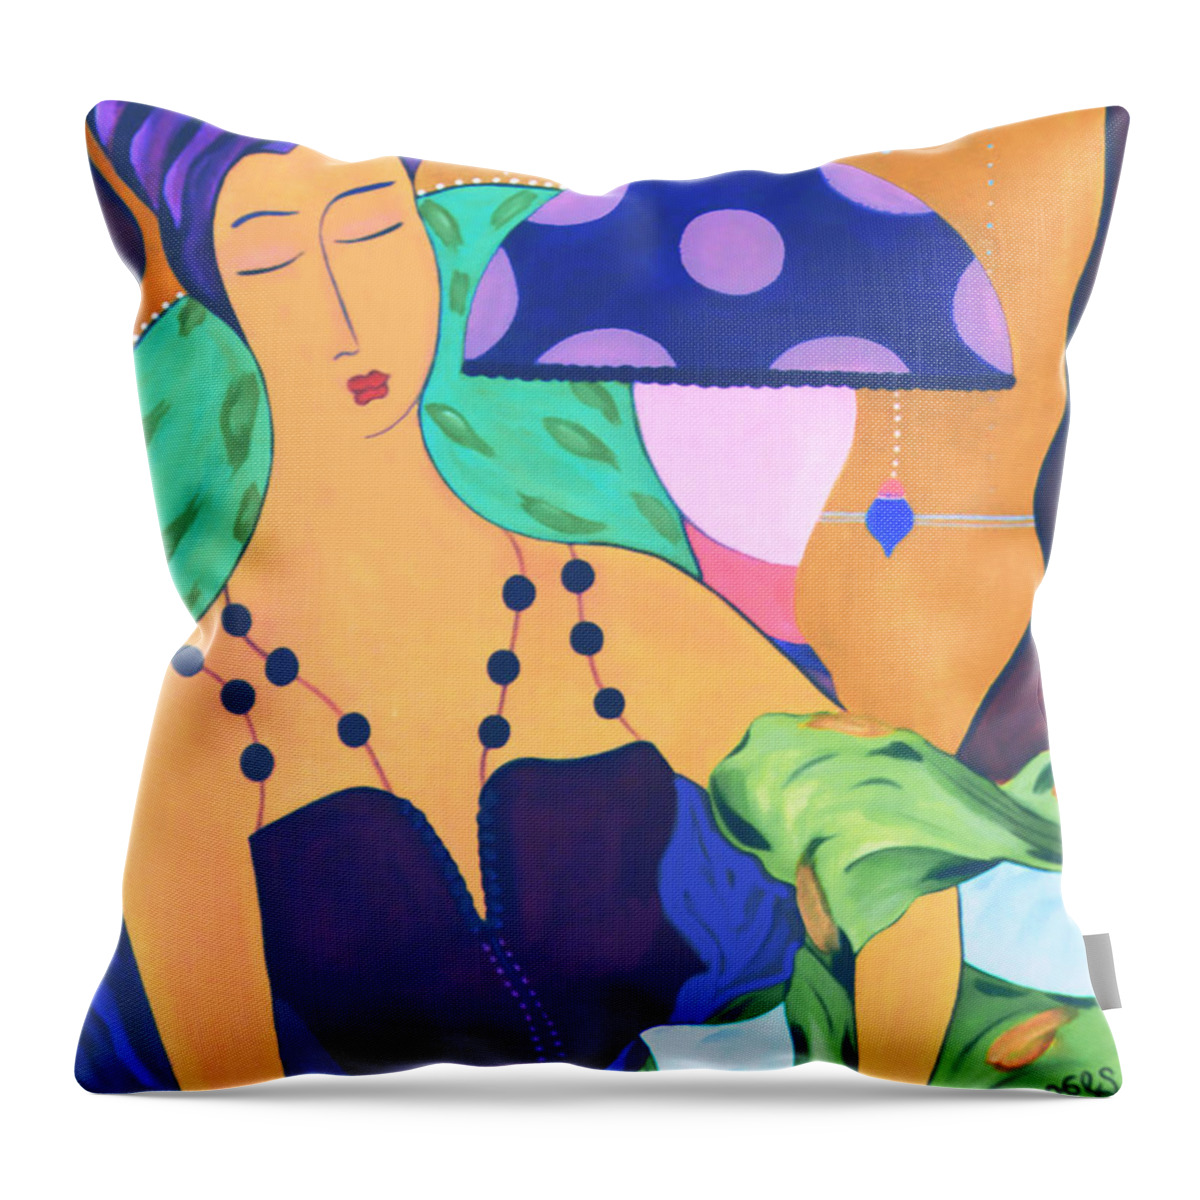  #female #figurative #decorative #pics #fineart #art #images #painter #artist #print #commisioned #feminine #women #dreamy #enchantment #simplepleasures Throw Pillow featuring the painting Simple Pleasures by Jacquelinemari